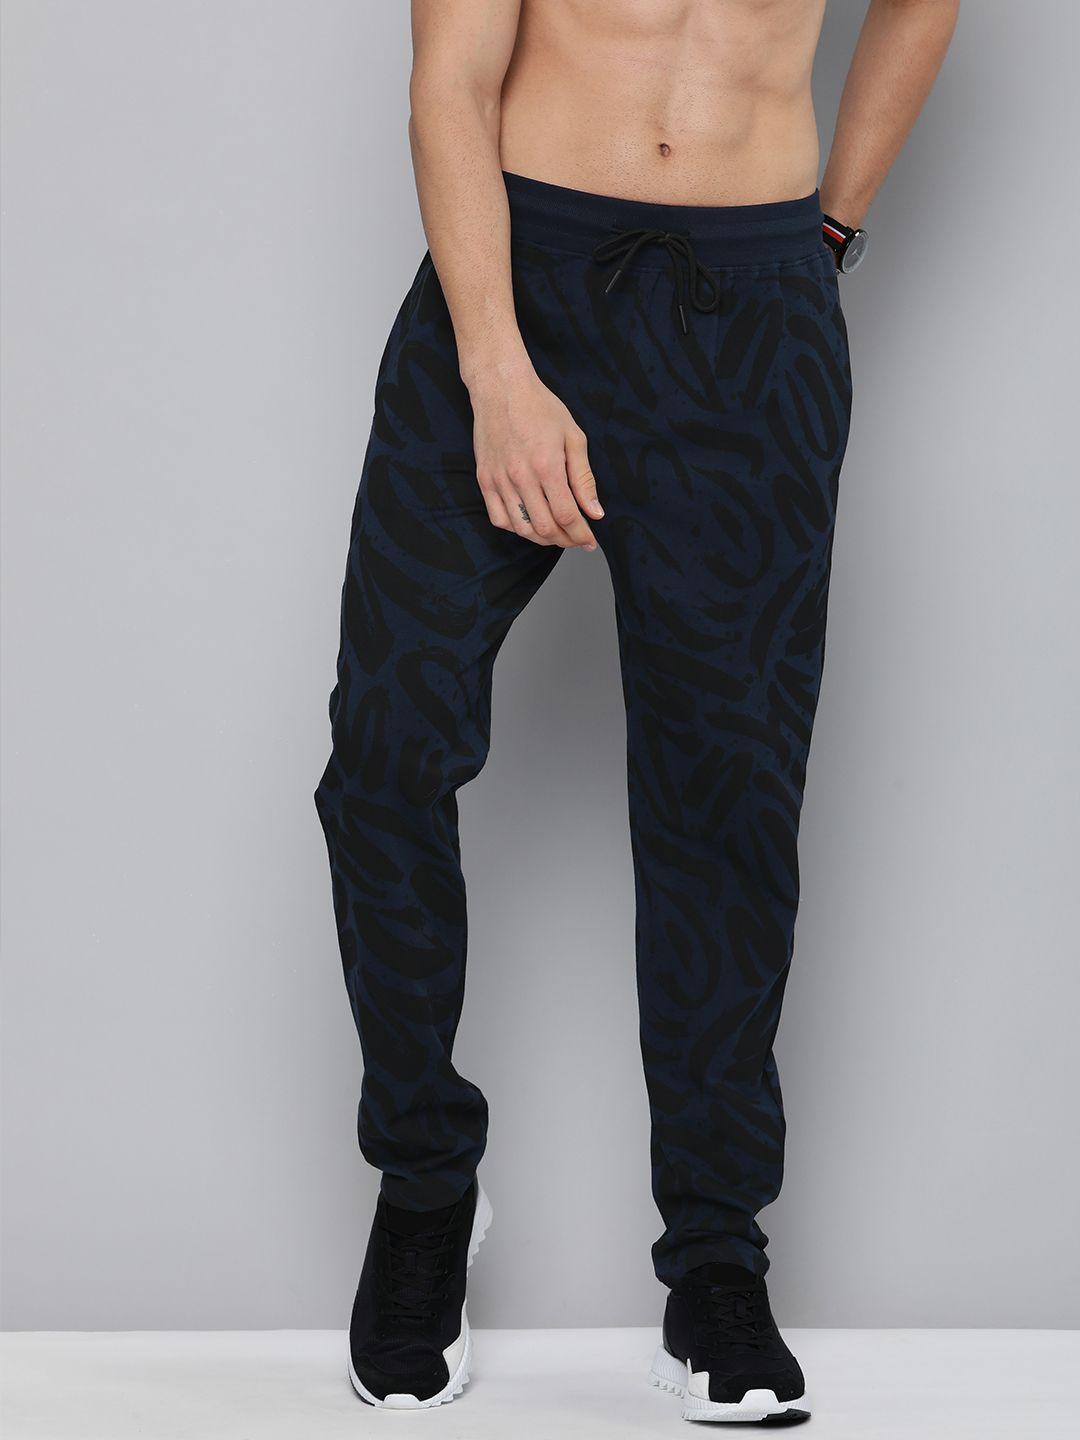 here&now men navy blue & black printed pure cotton track pants